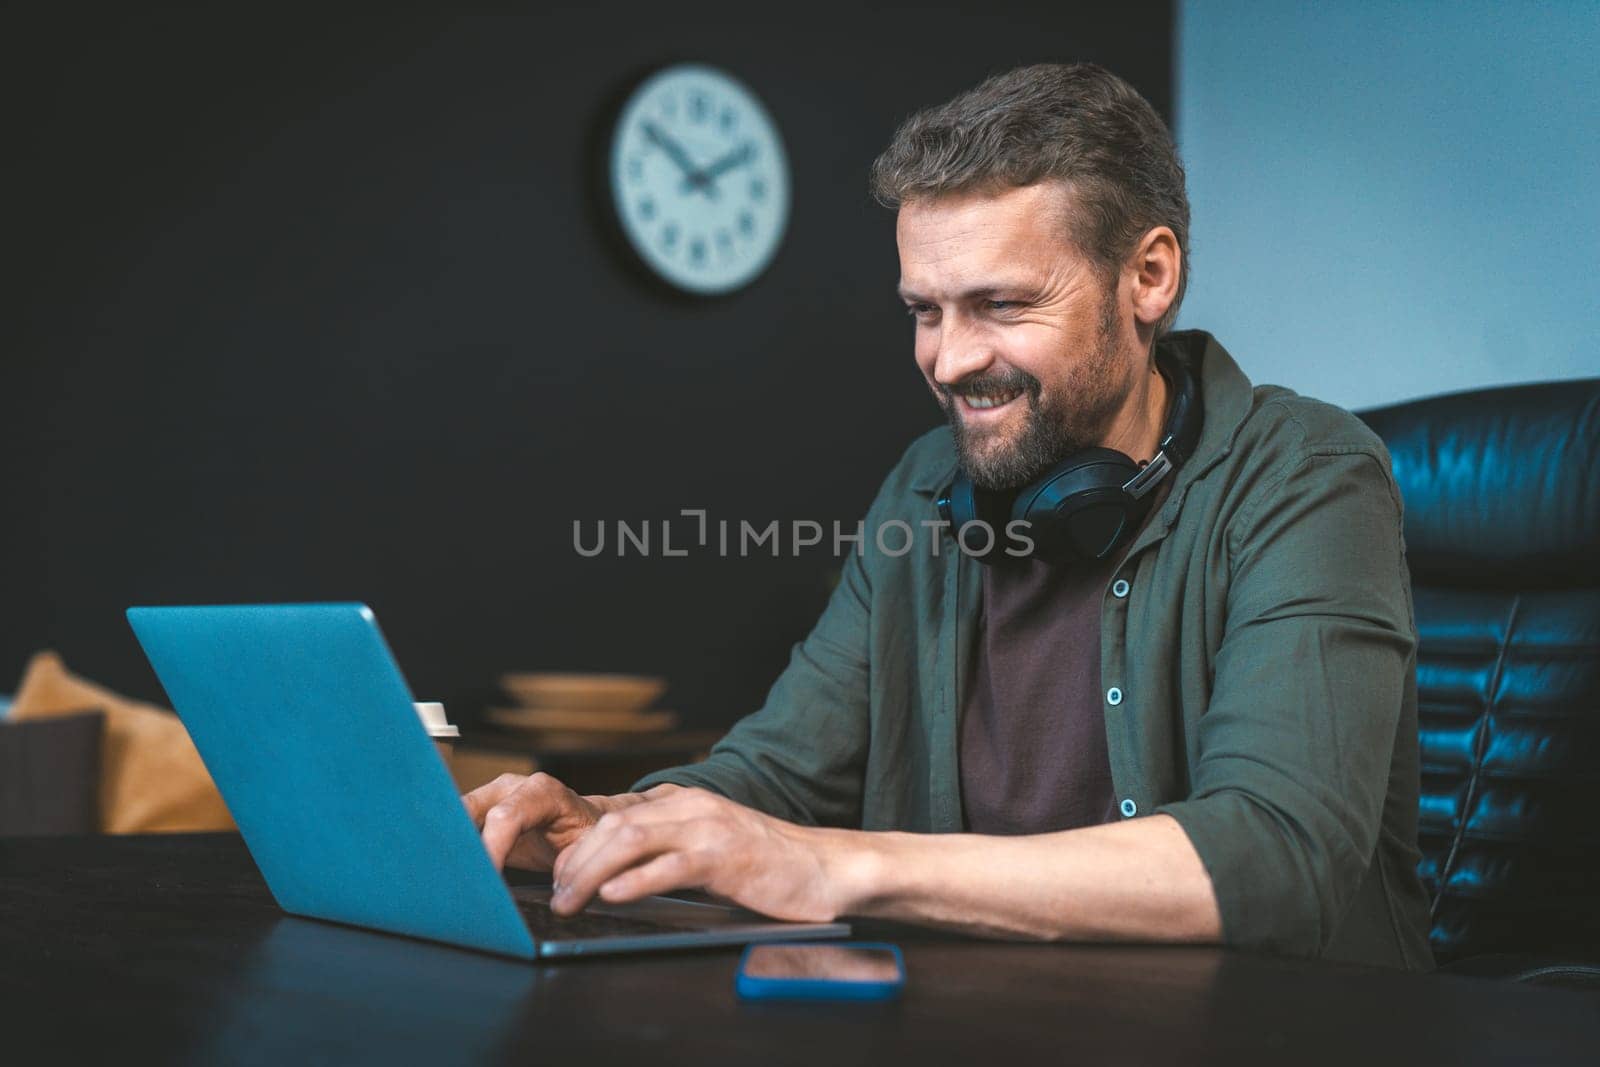 Happy and motivated man is working on laptop at desk in stylish loft office, with intention of making money. He focused and determined, yet also relaxed and comfortable in work environment. High quality photo